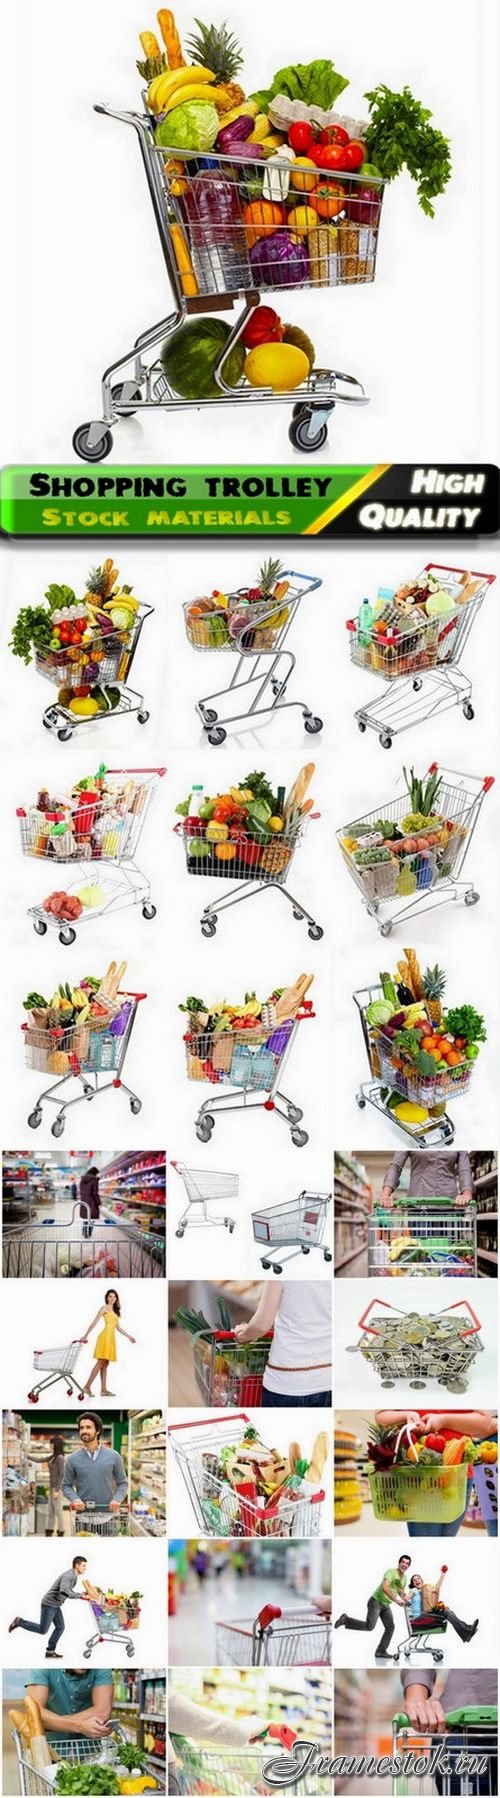 Shopping trolley with vegetabels and other food products - 25 HQ Jpg